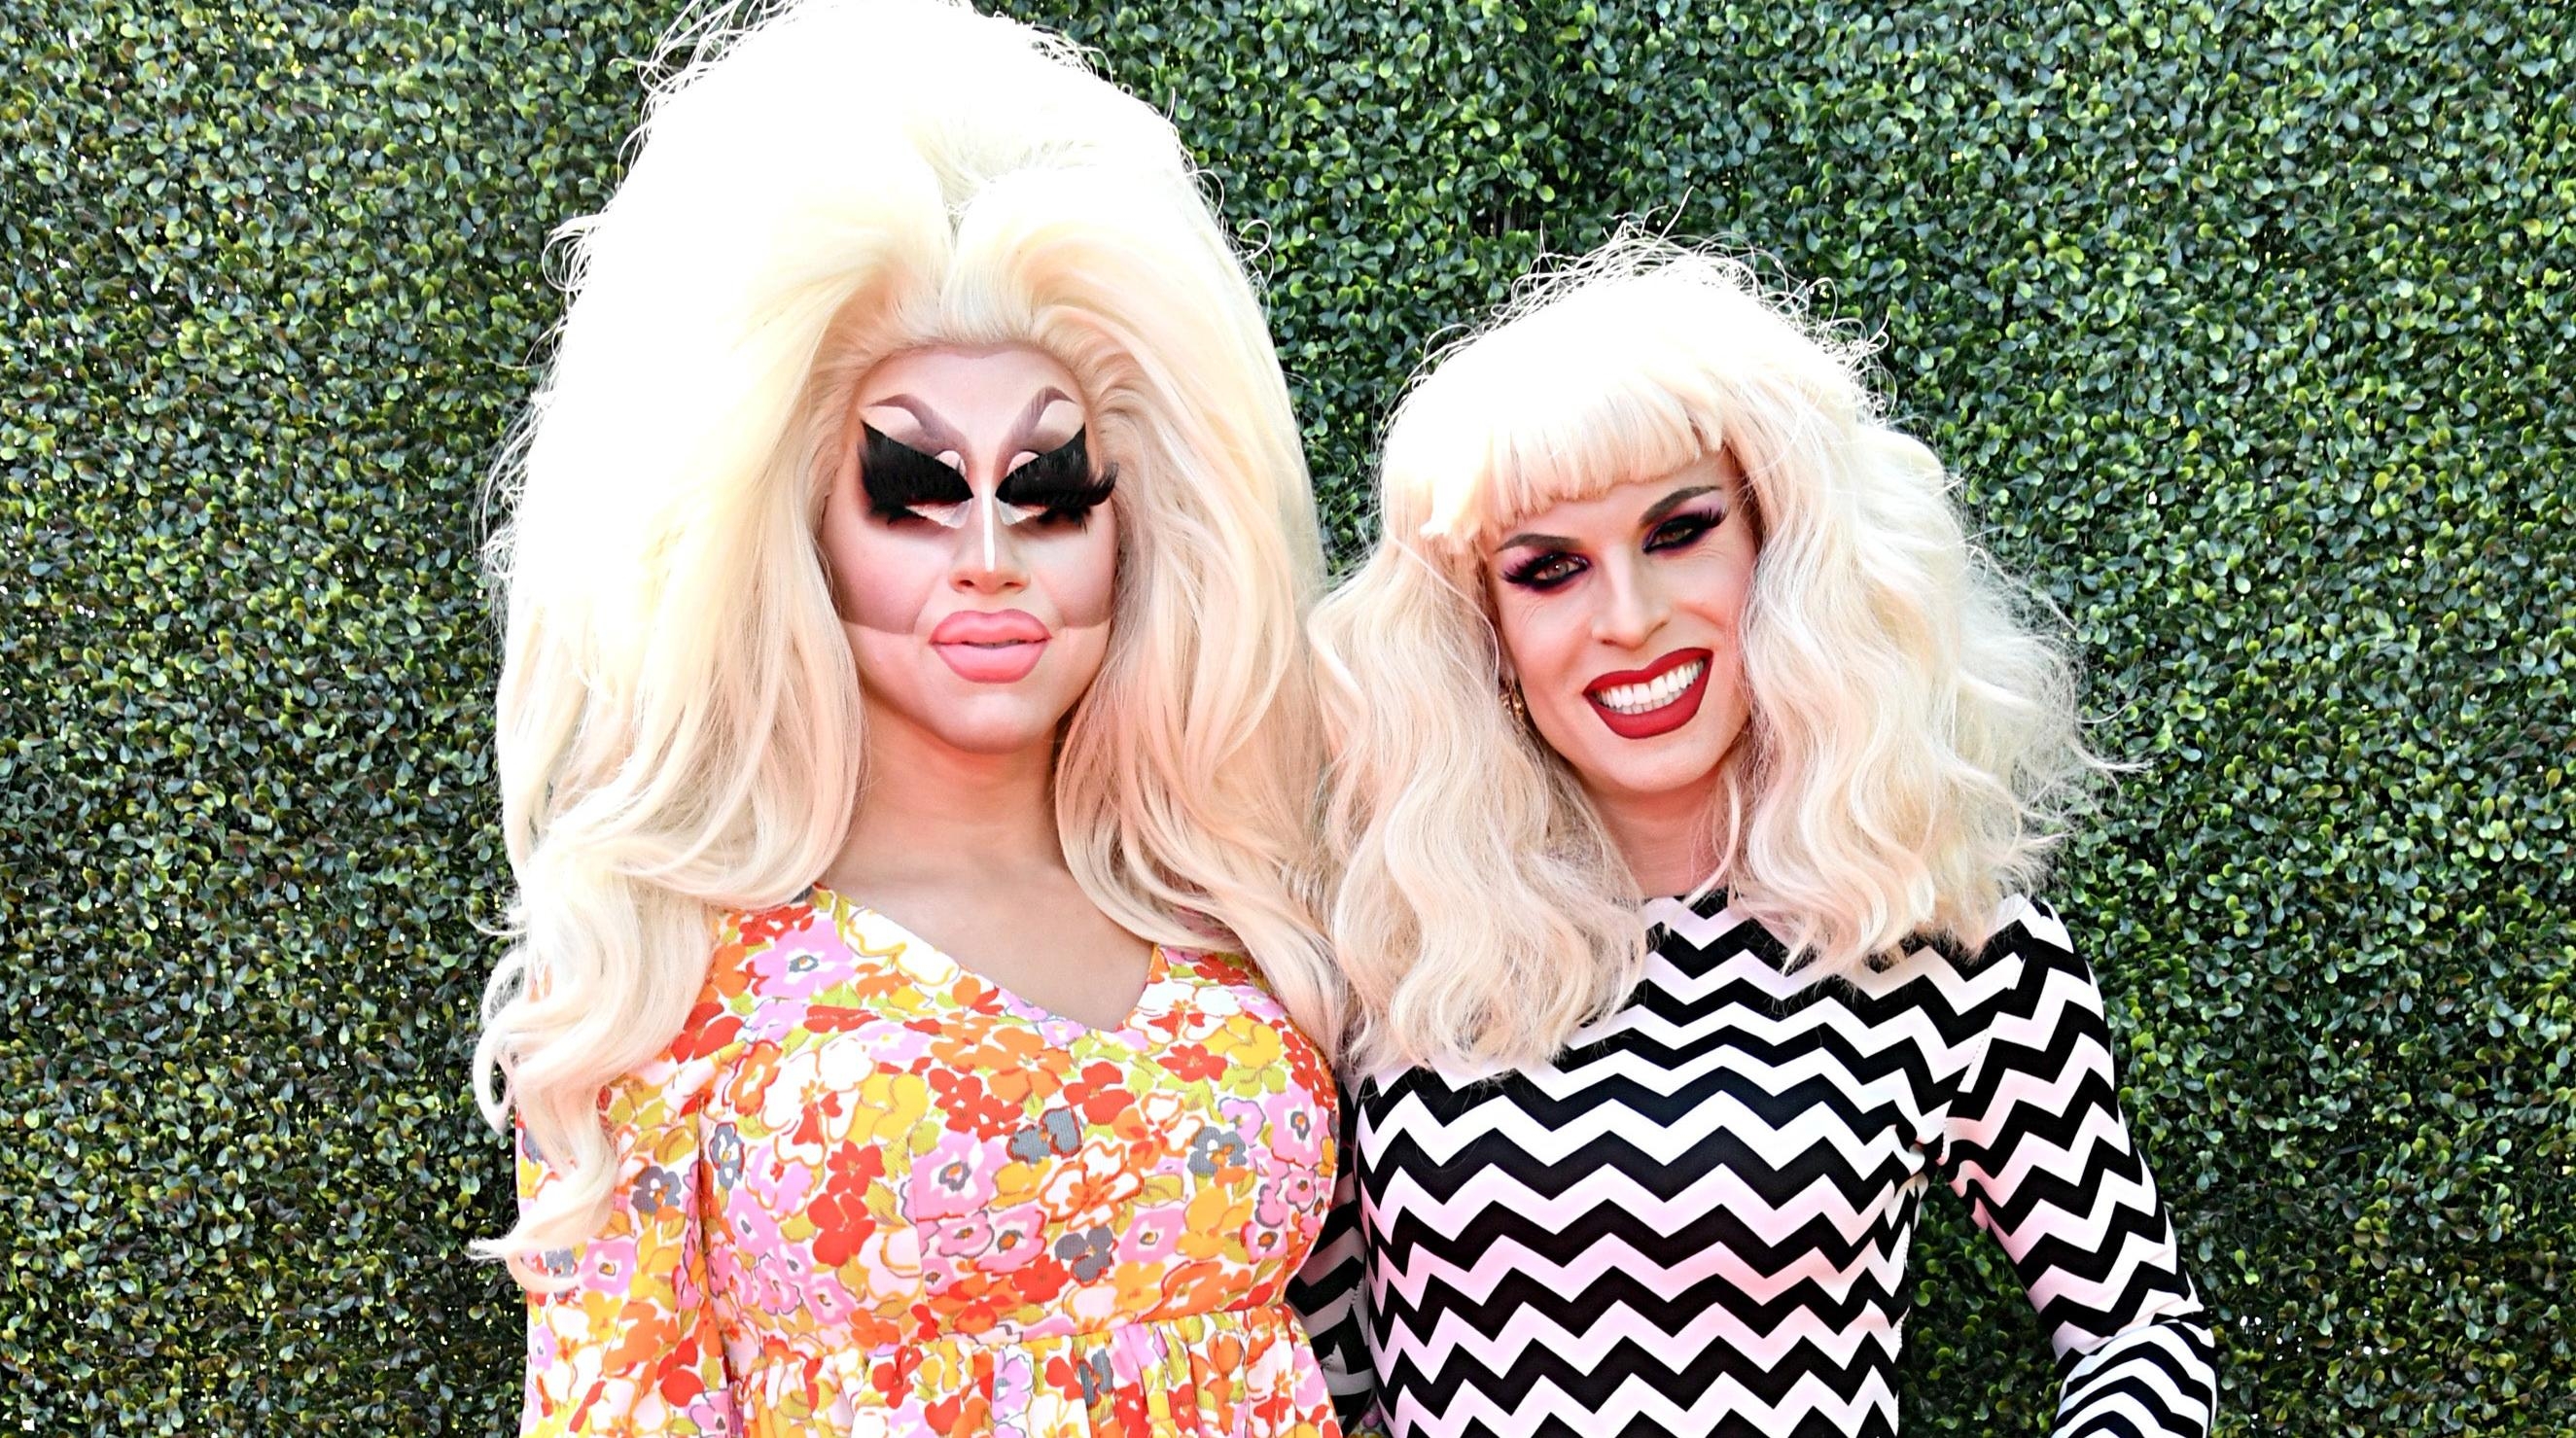 Trixie Mattel to help Katya find romance in dating series From Katya With Love